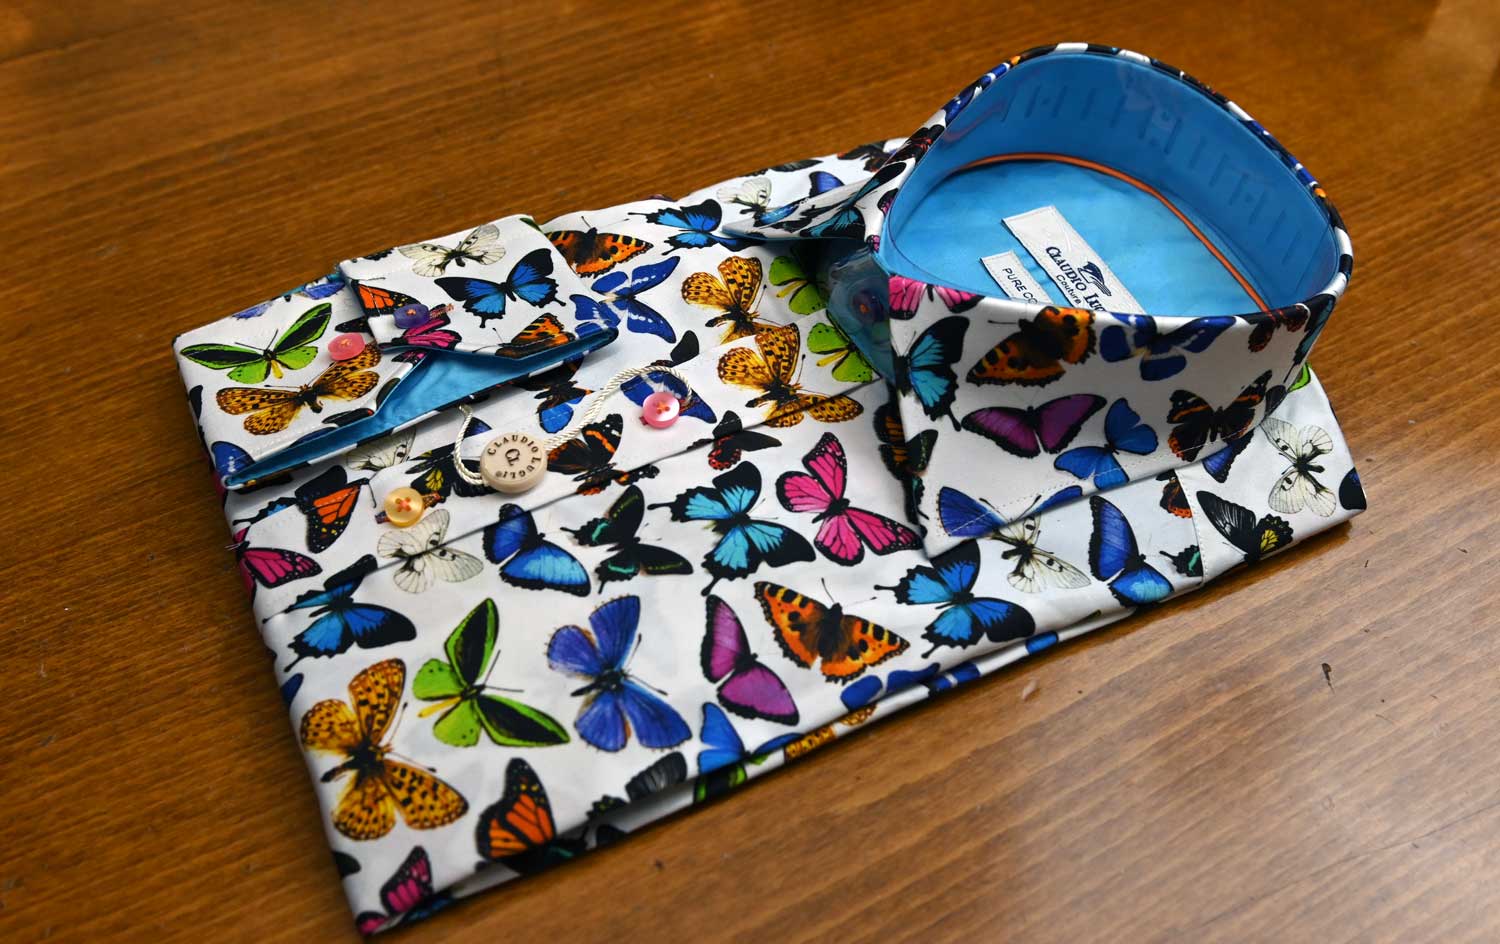 Claudio Lugli shirt with colourful butterflies on white, blue lining.